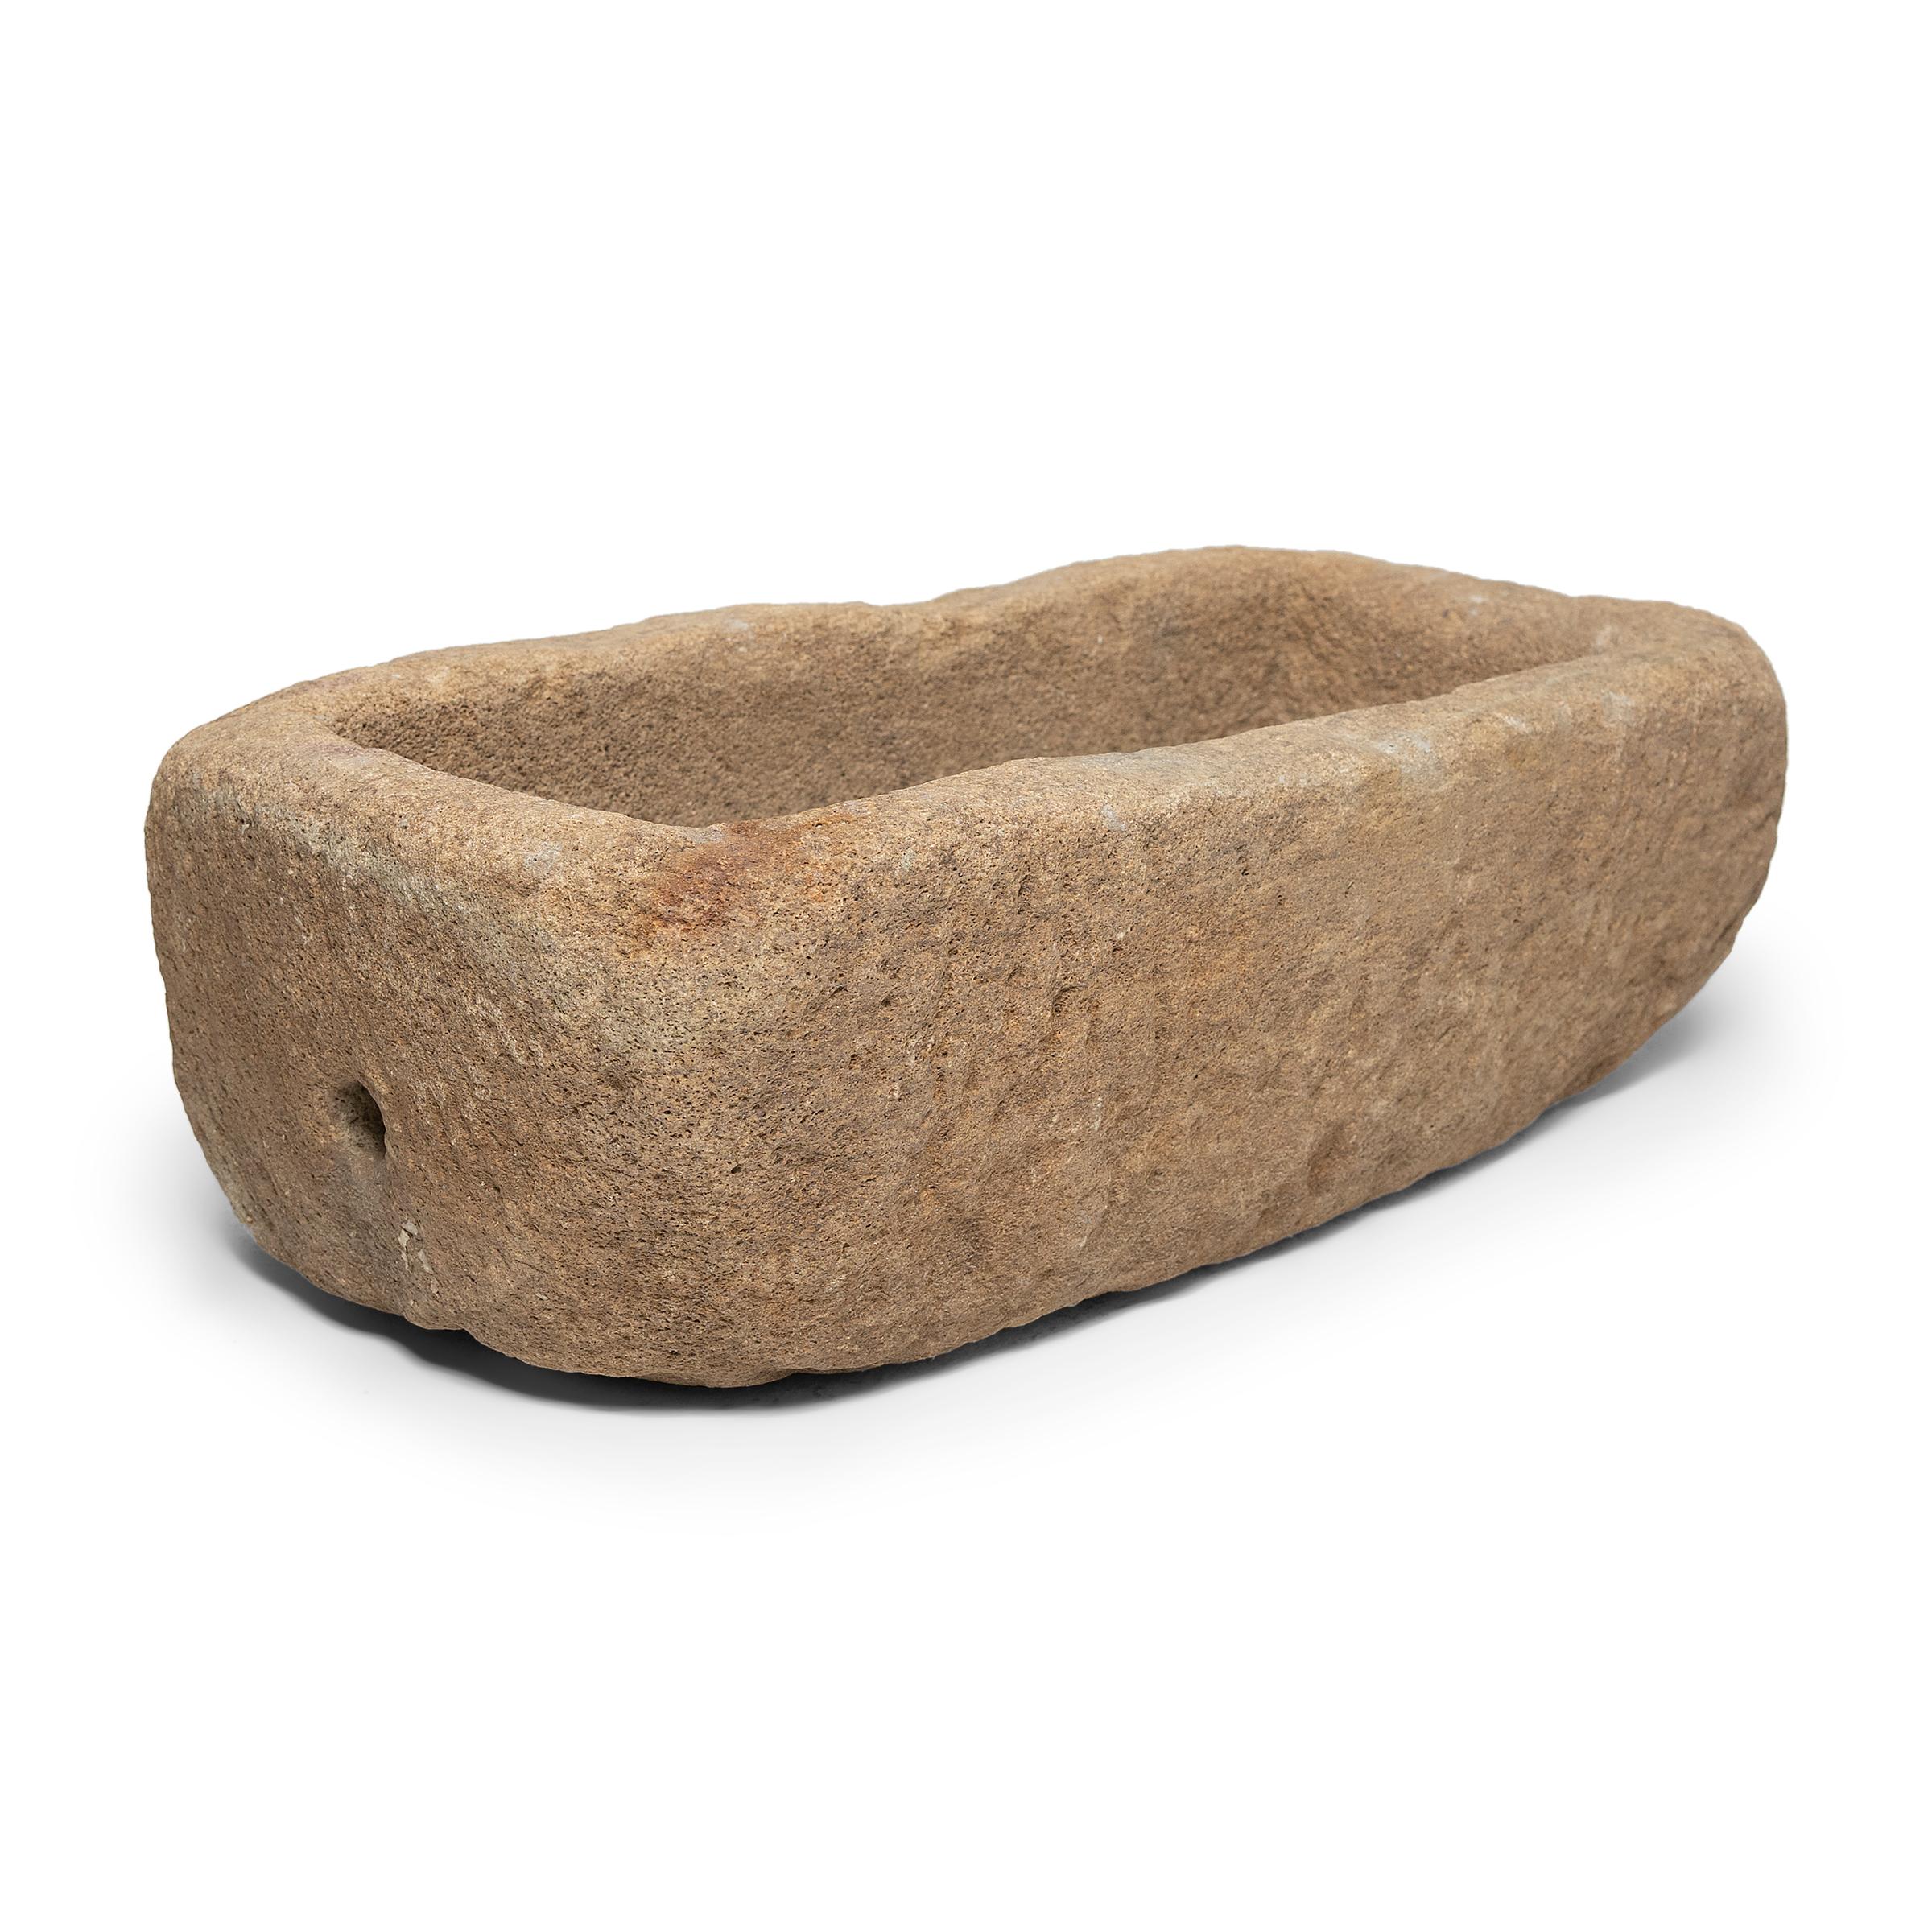 Once used on a provincial Chinese farm to hold water or animal feed, this early 20th-century stone trough is celebrated today for its organic form and rustic authenticity. Hand-carved from solid limestone, the trough has a shallow, rectangular form